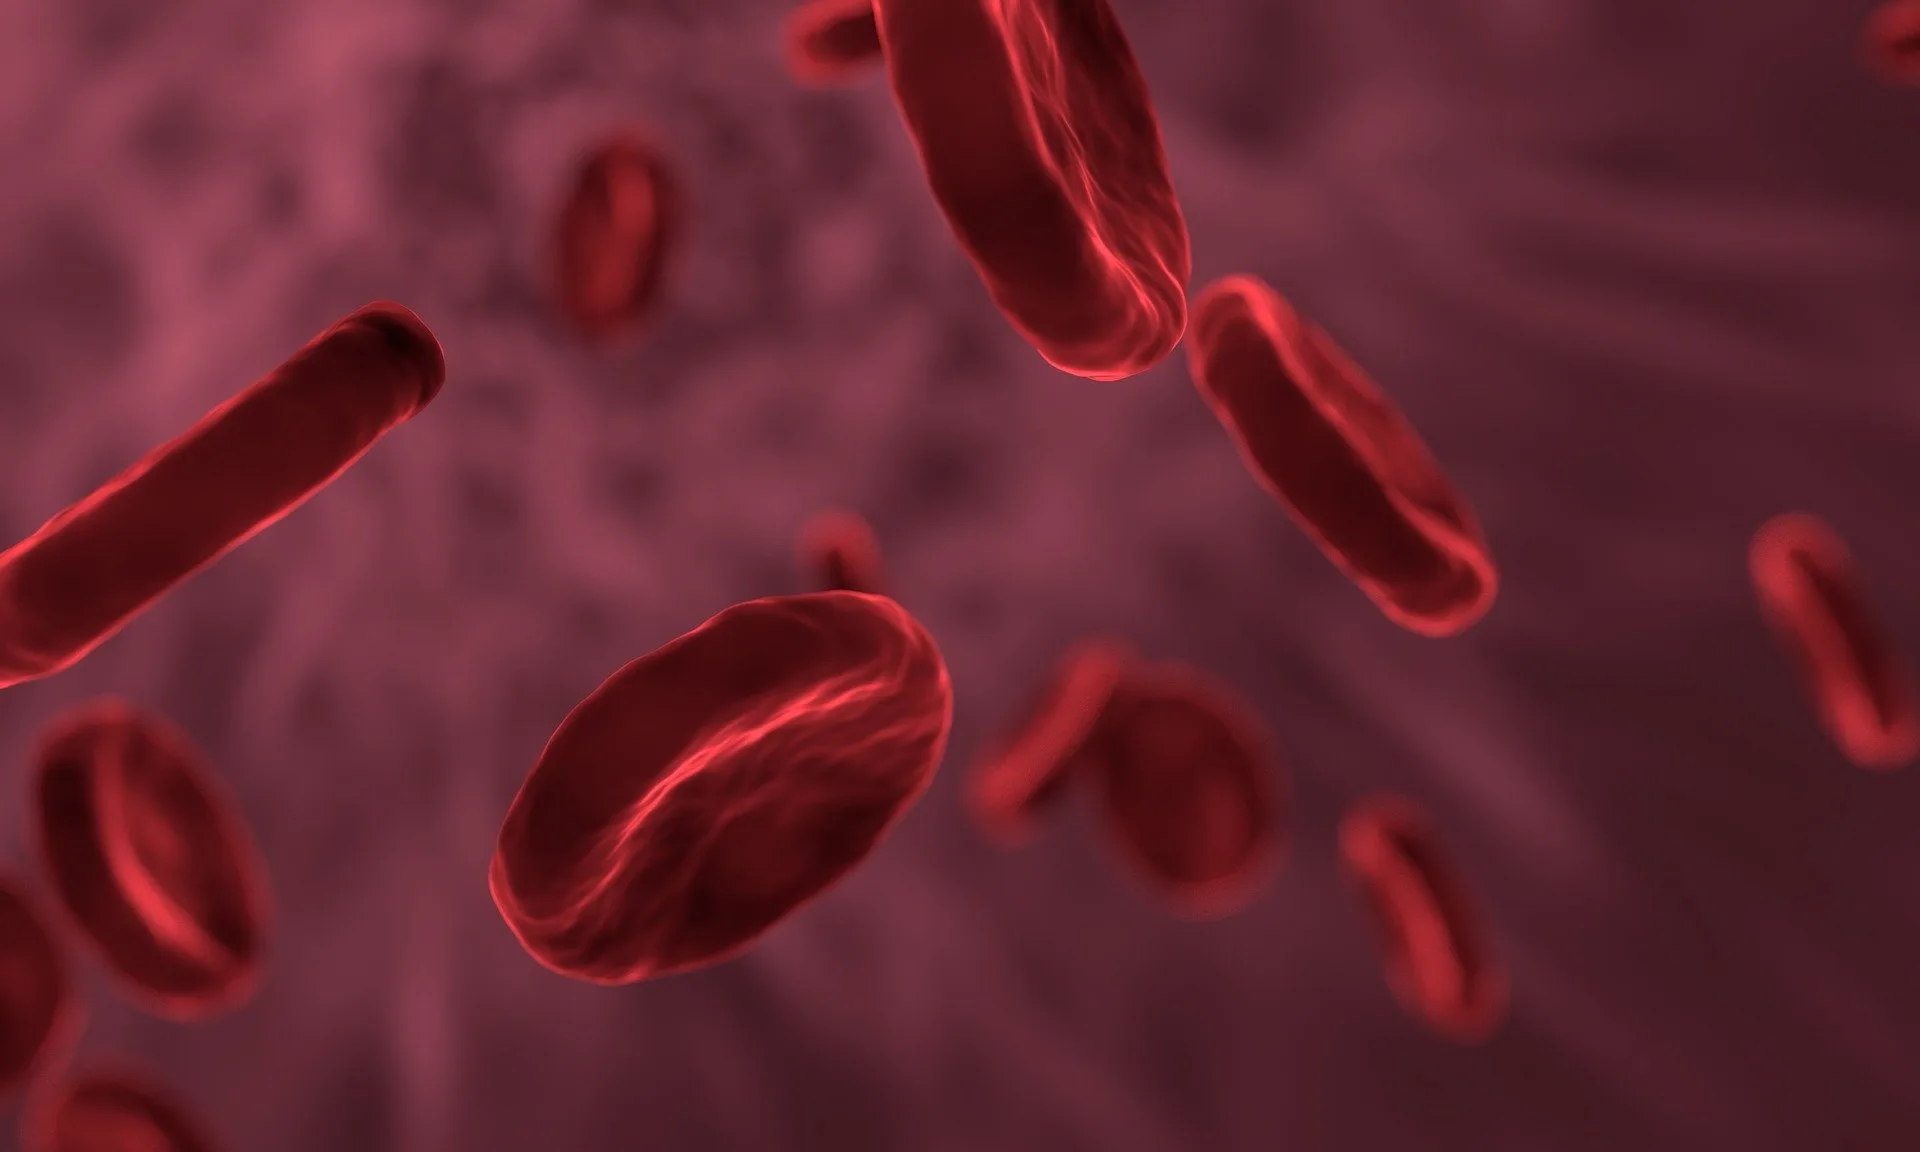 Haemophilia: What To Eat And What To Avoid